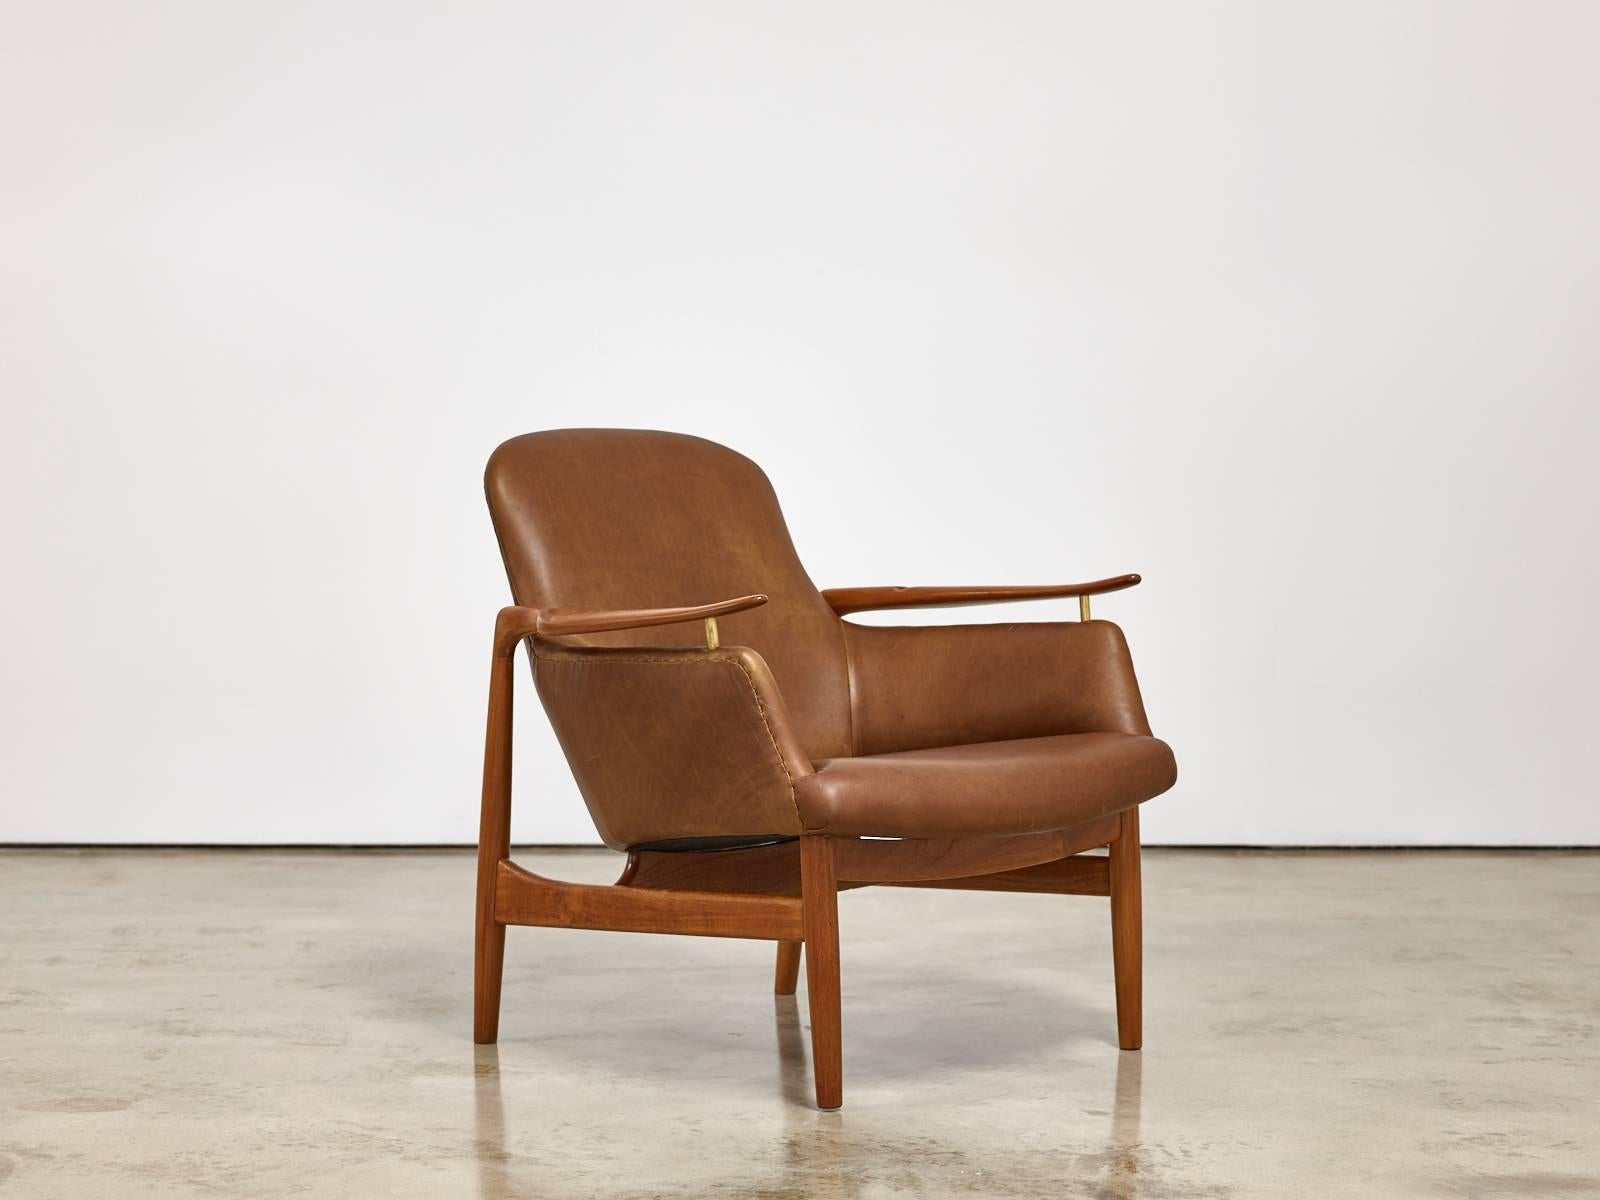 Brass Finn Juhl by Niels Vodder Two-Seat Sofa and Lounge Chairs, Model No. Nv53, 1950s